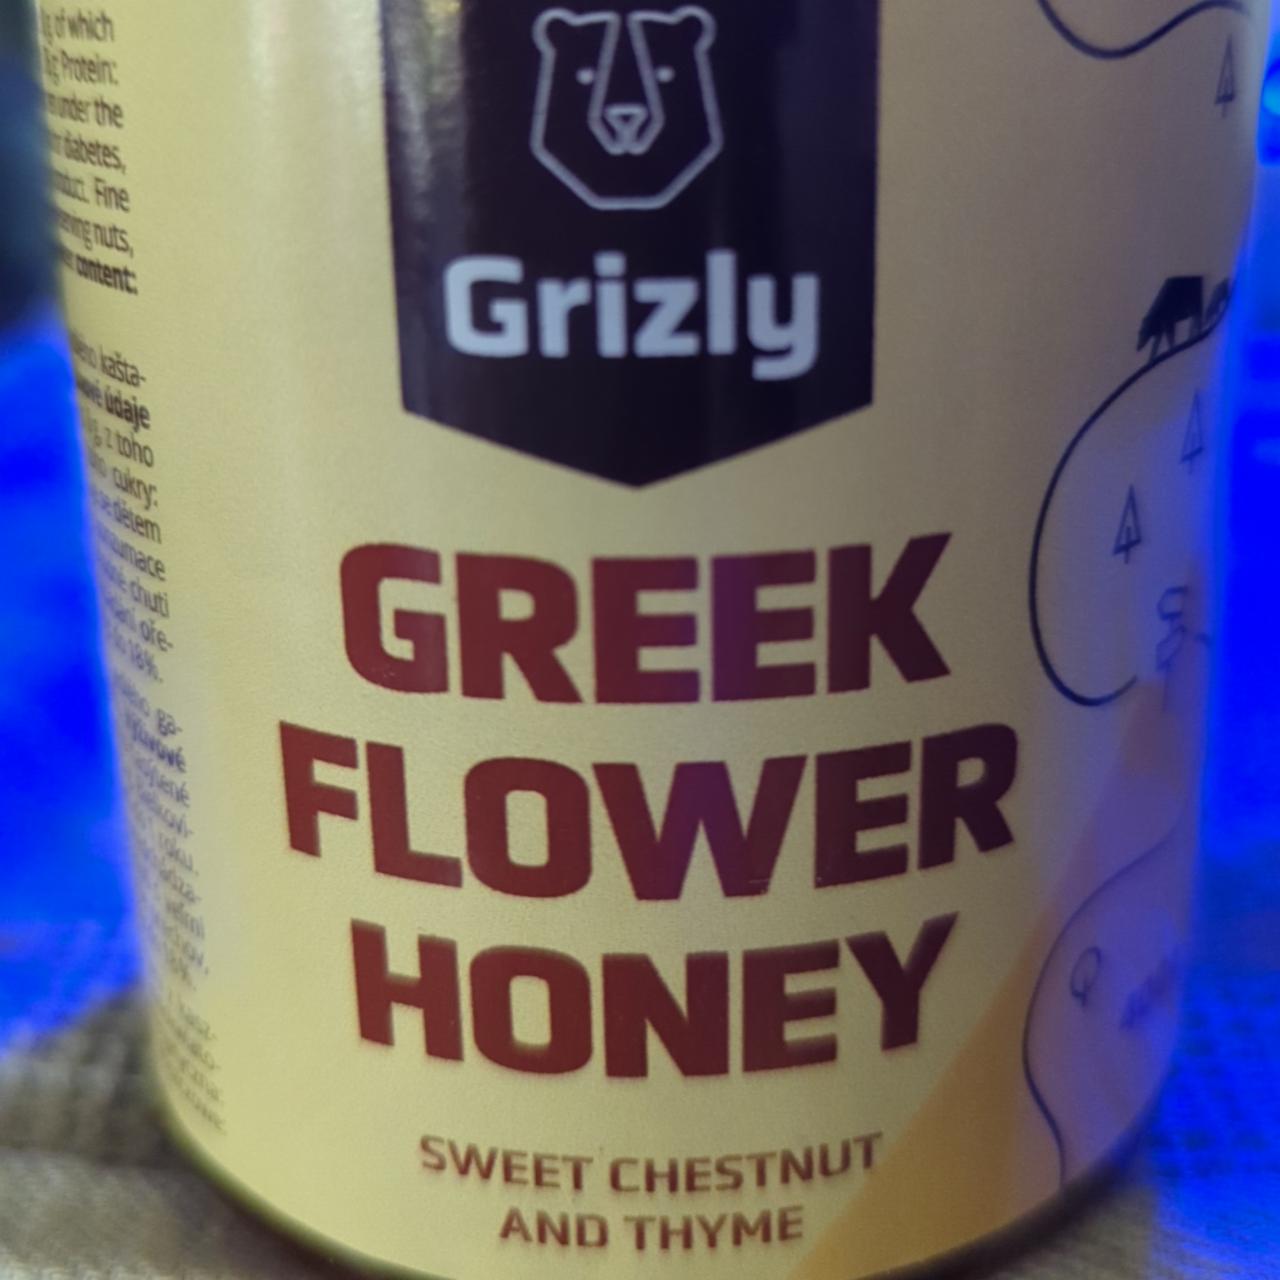 Fotografie - Greek Flower Honey sweet chestnut and thyme Grizly